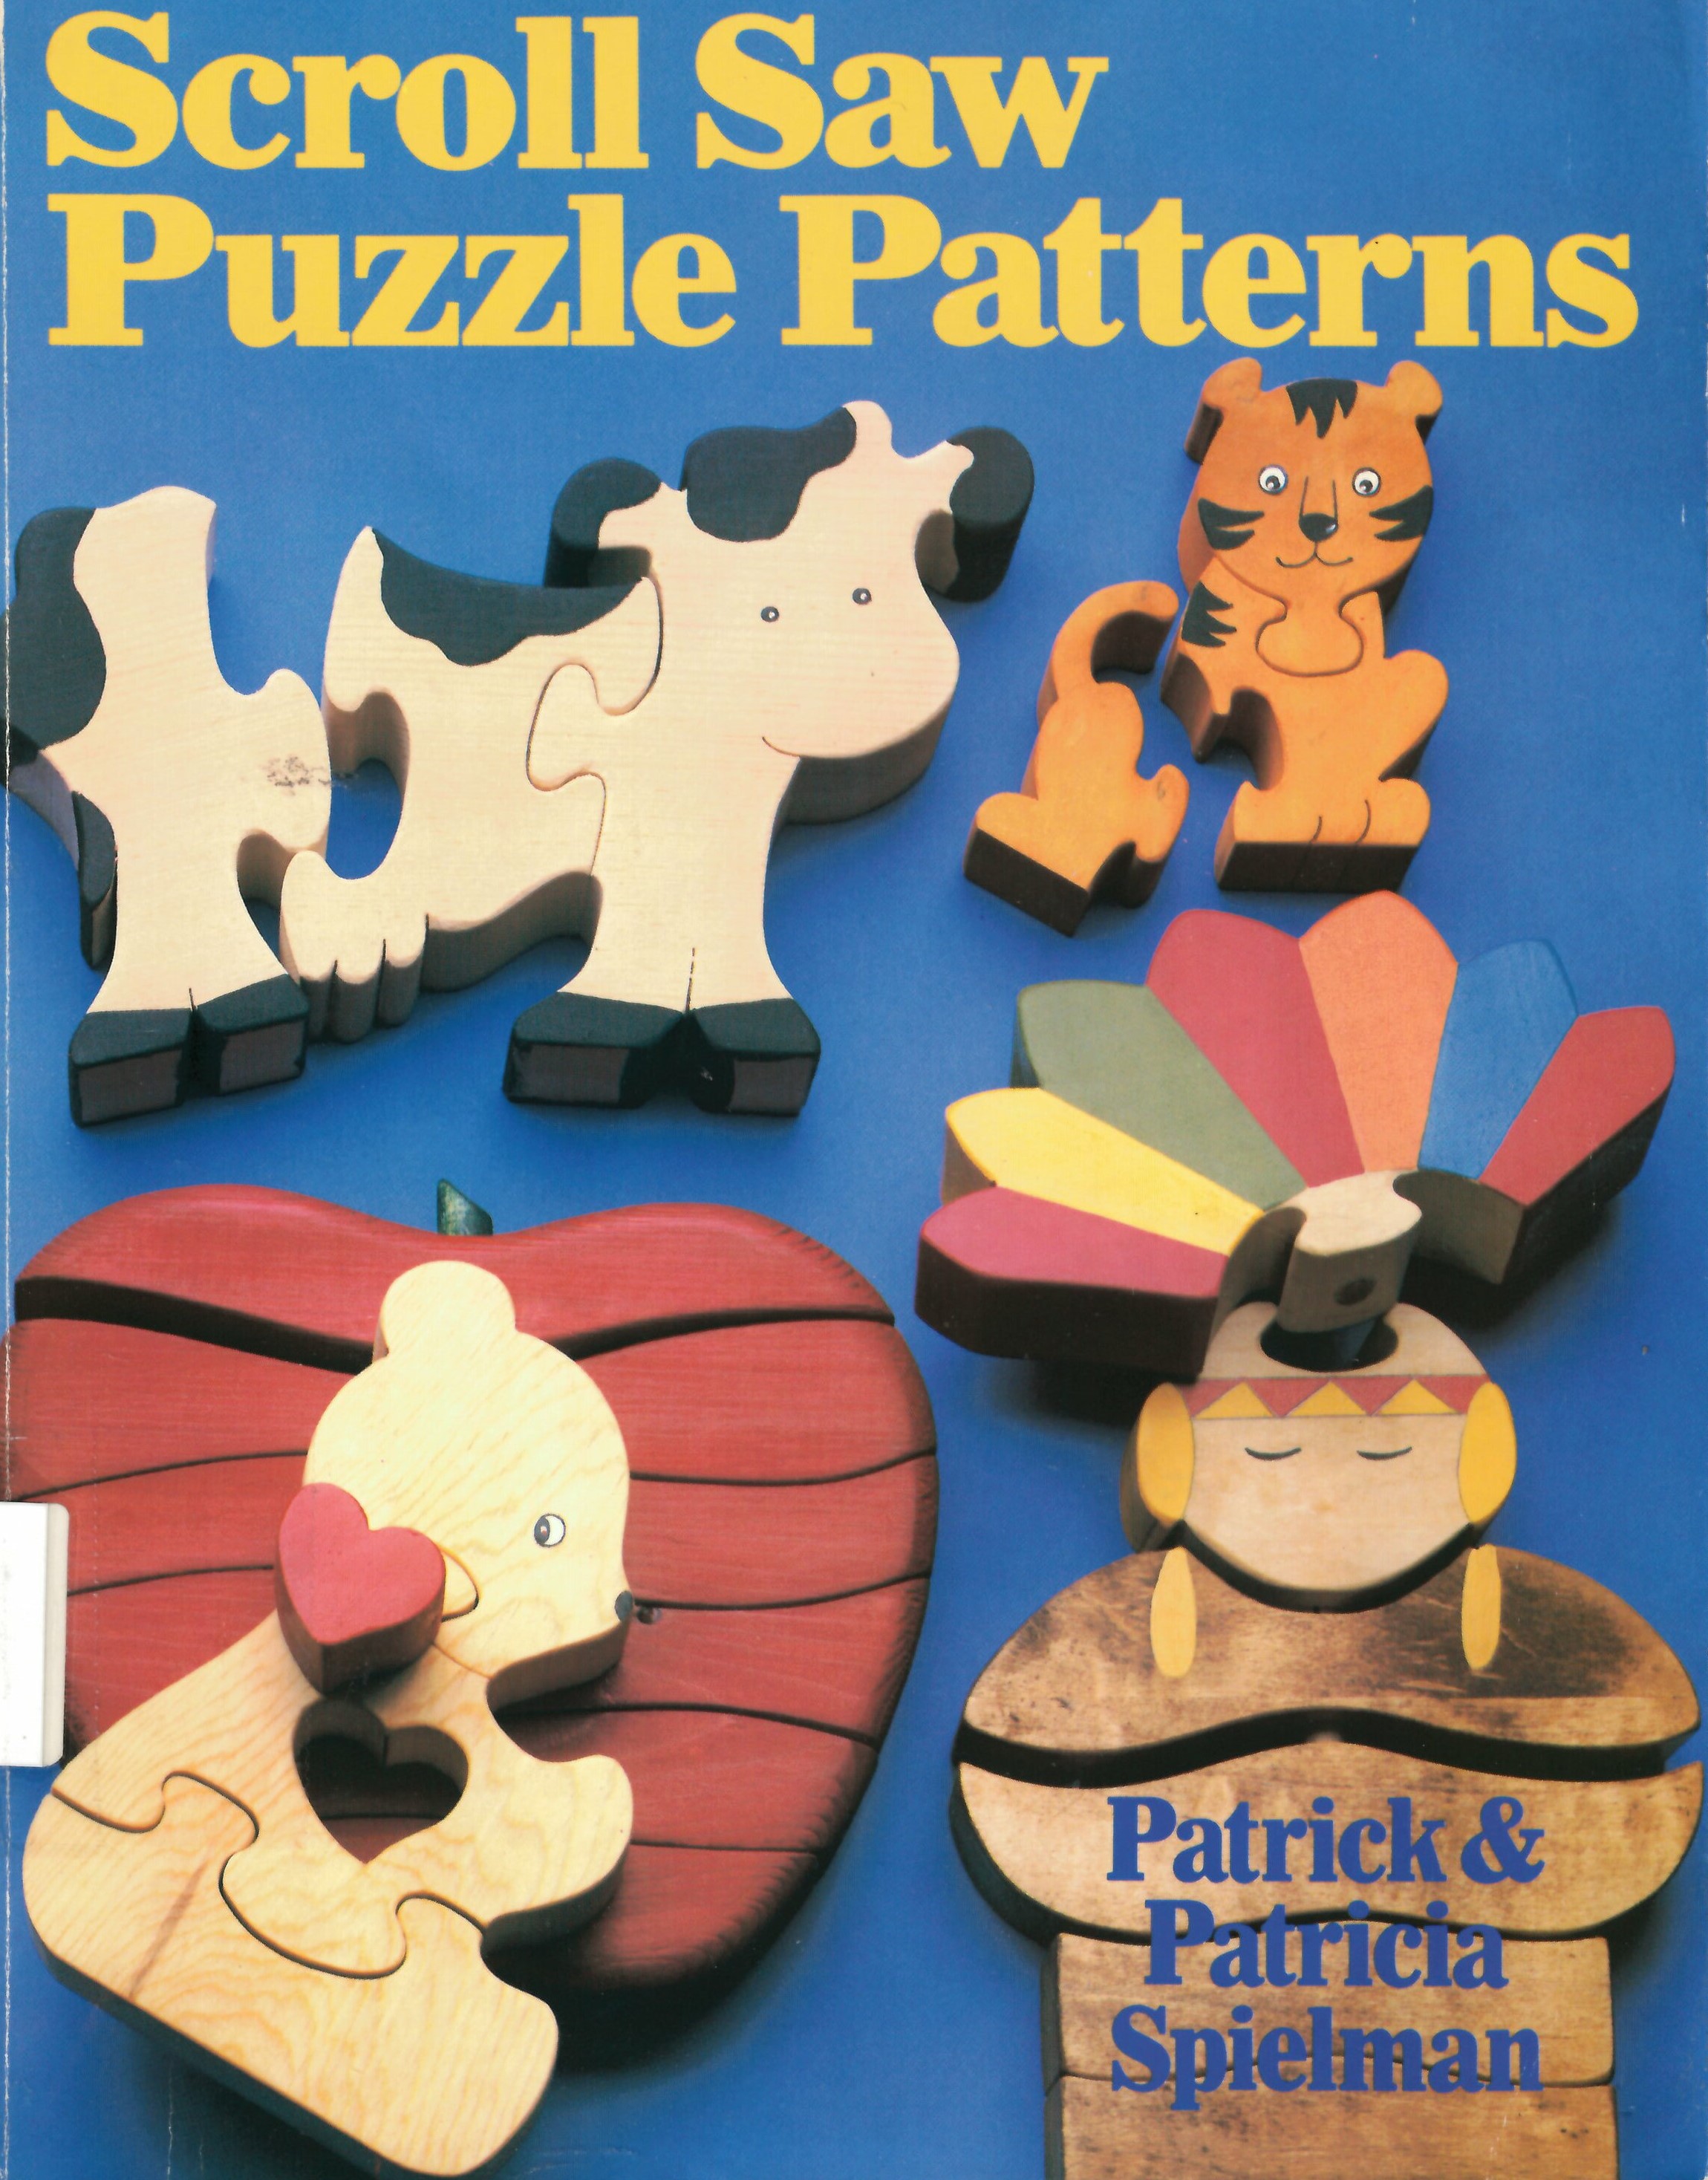 Scroll saw puzzle patterns